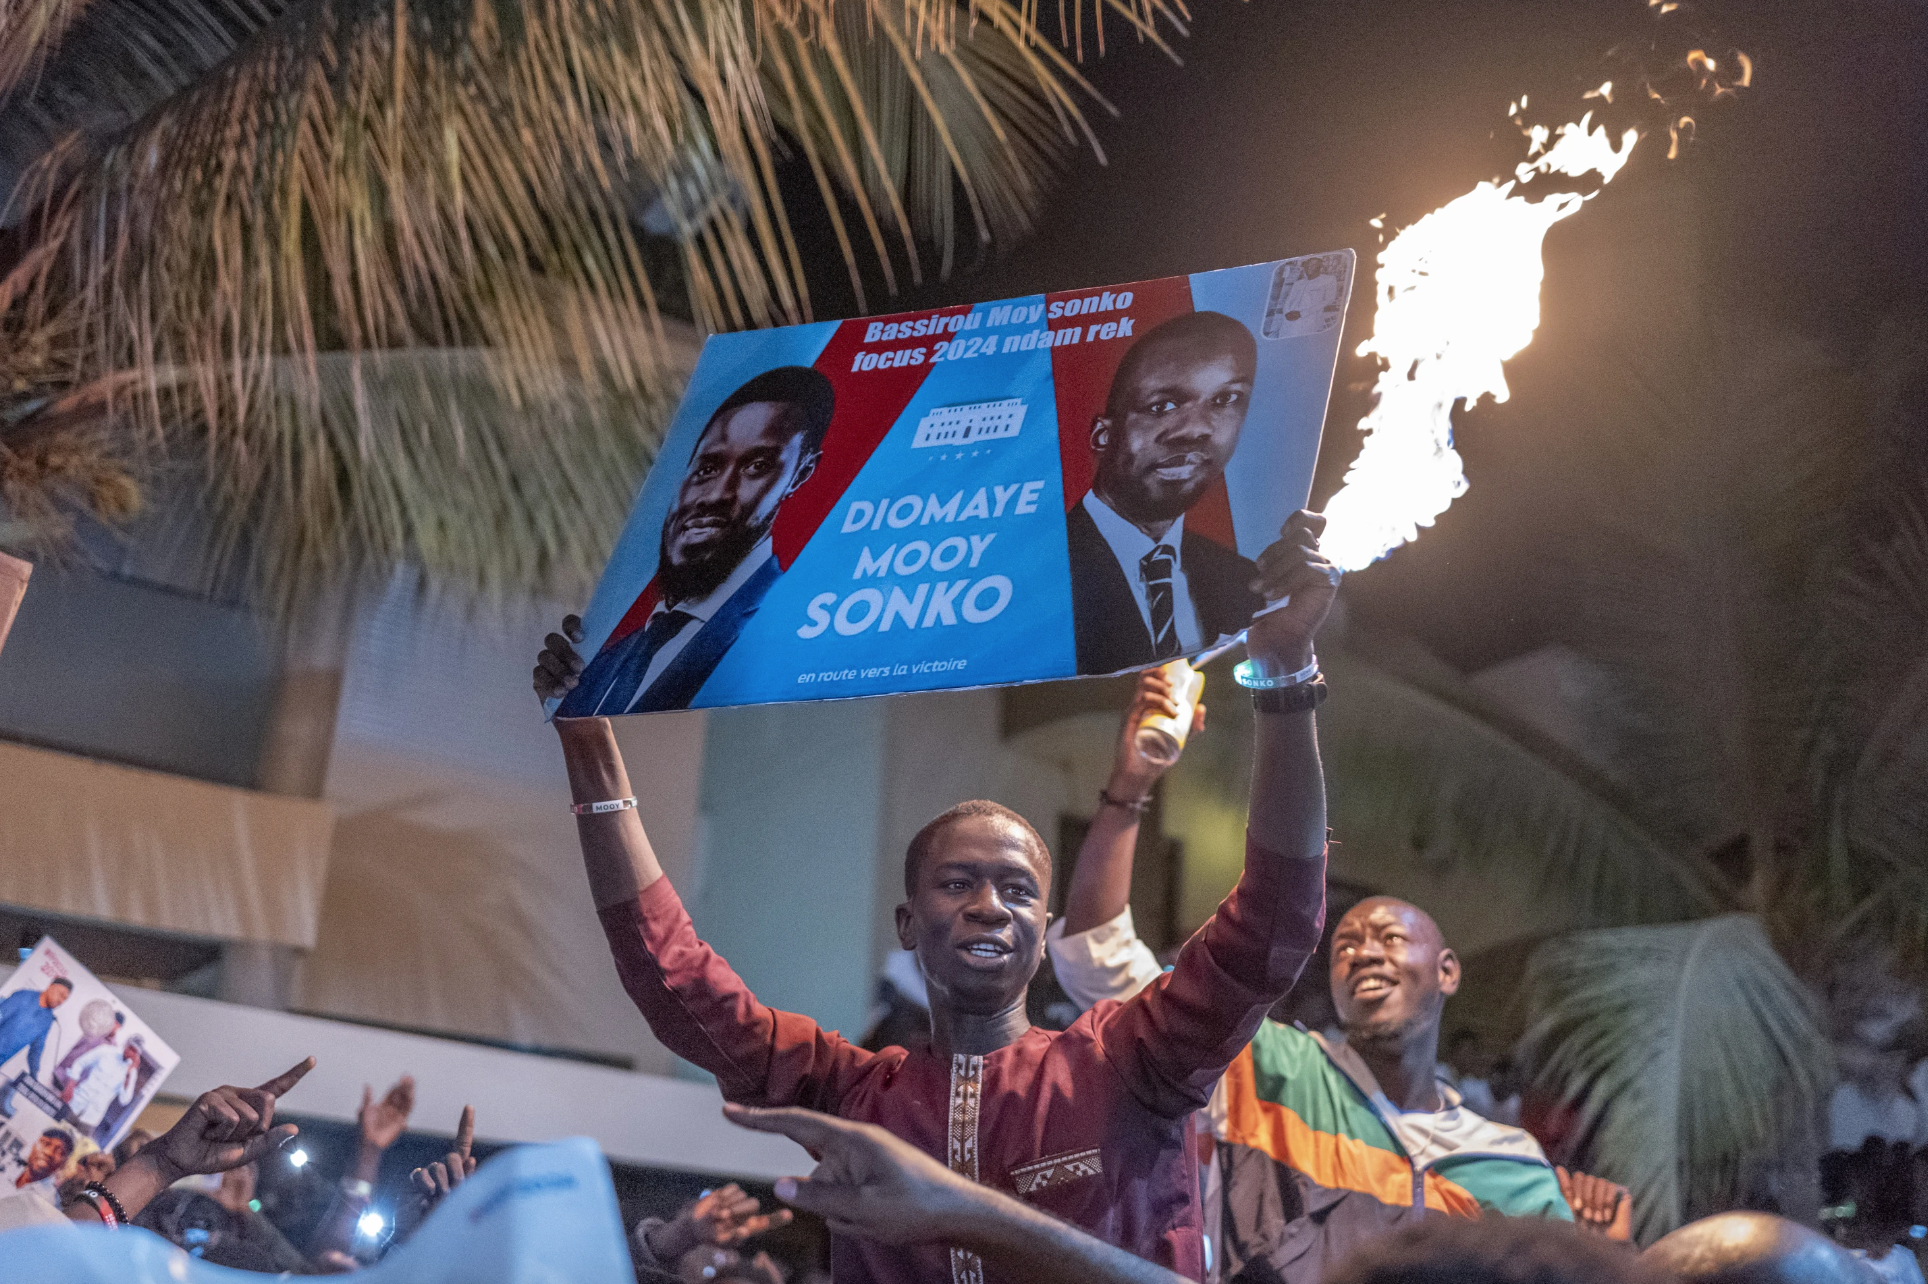 Supporters celebrate the release of Senegal’s top opposition leader Ousmane Sonko